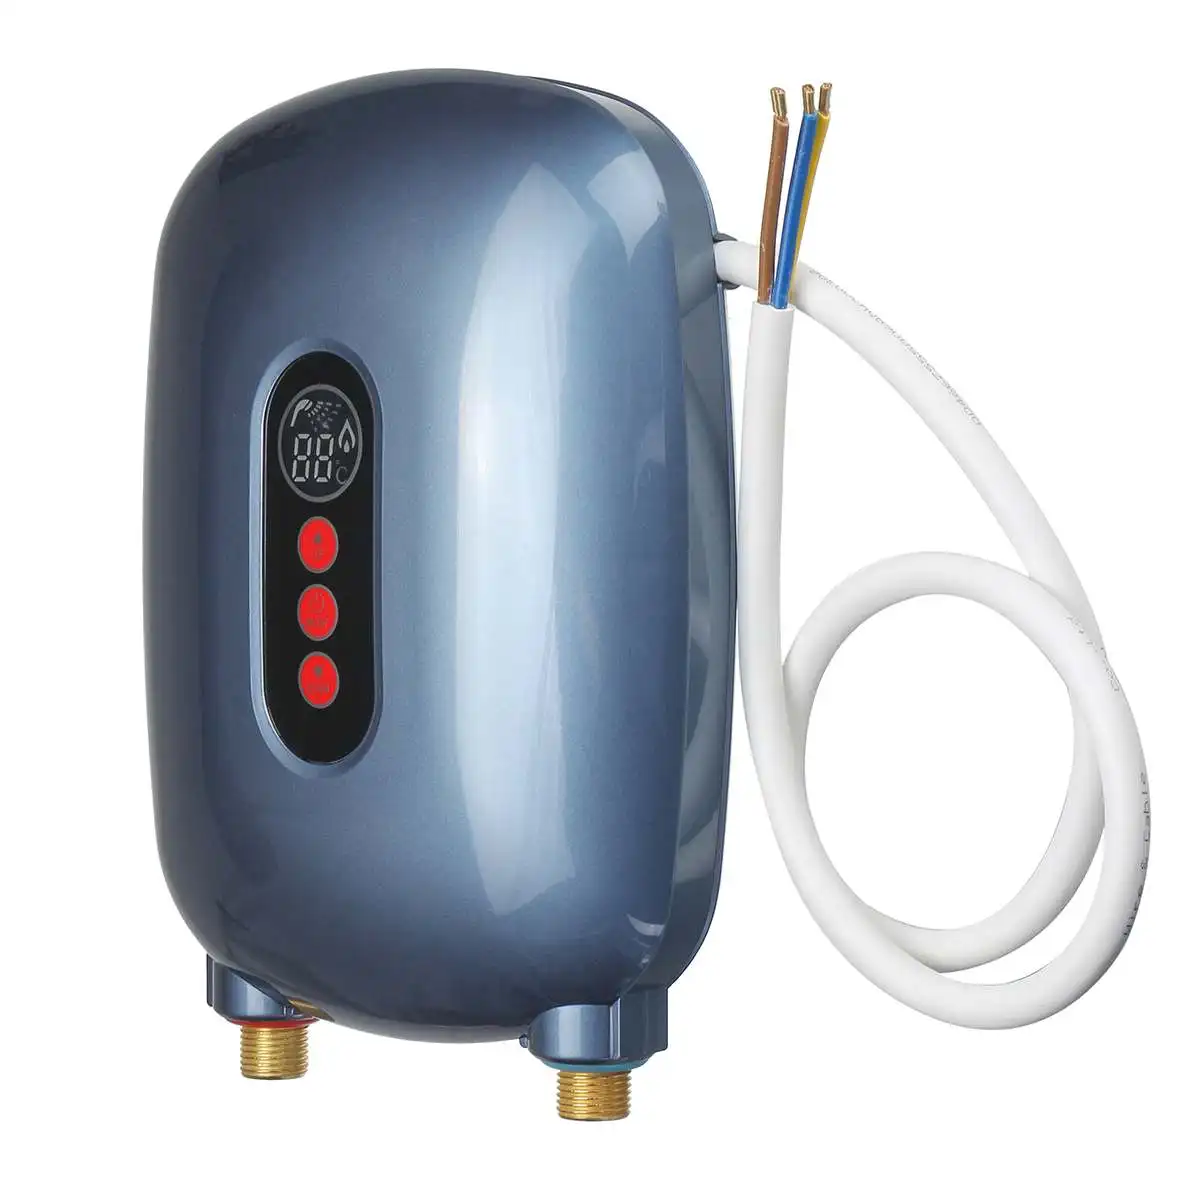 220V Touch Temperature Control Electric Hot Water Heater Household Instant Water Heating Machine Tankless Bathroom 304 liner